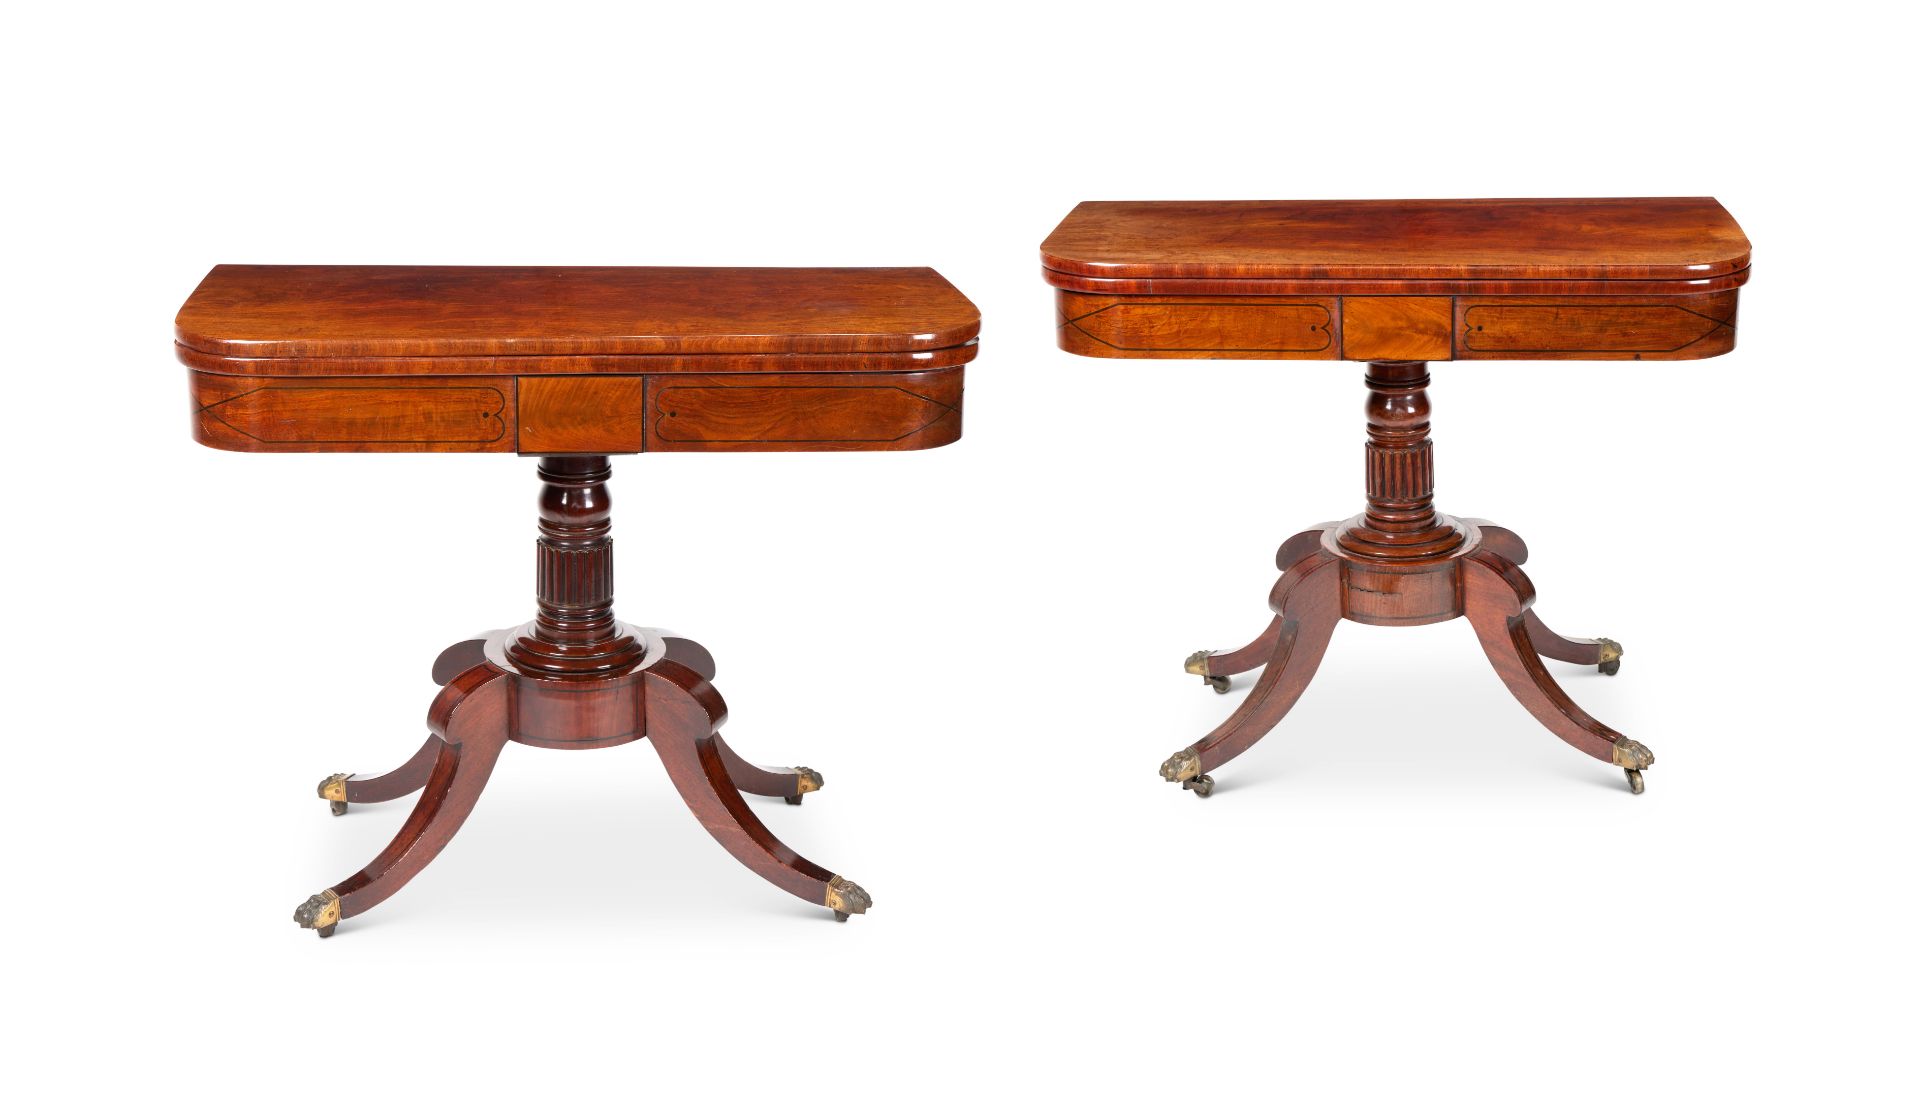 A pair of Regency mahogany and ebony line and dot inlaid card tables